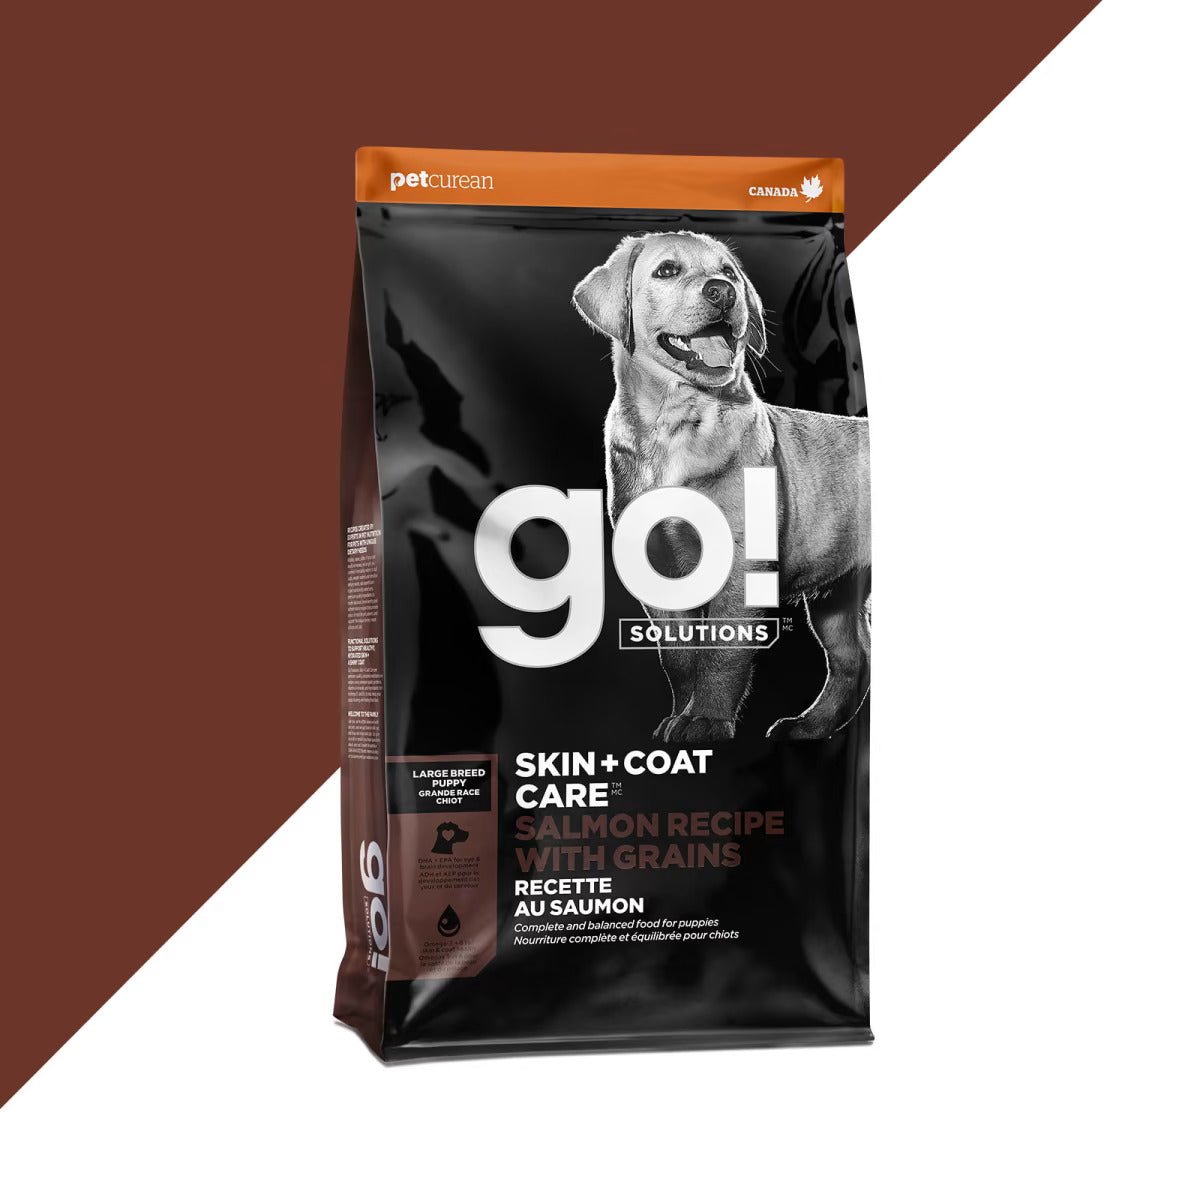 Skin + Coat Care Large Breed Puppy Salmon Recipe With Grains - Dry Dog Food - Go! Solutions - PetToba-Go! Solutions